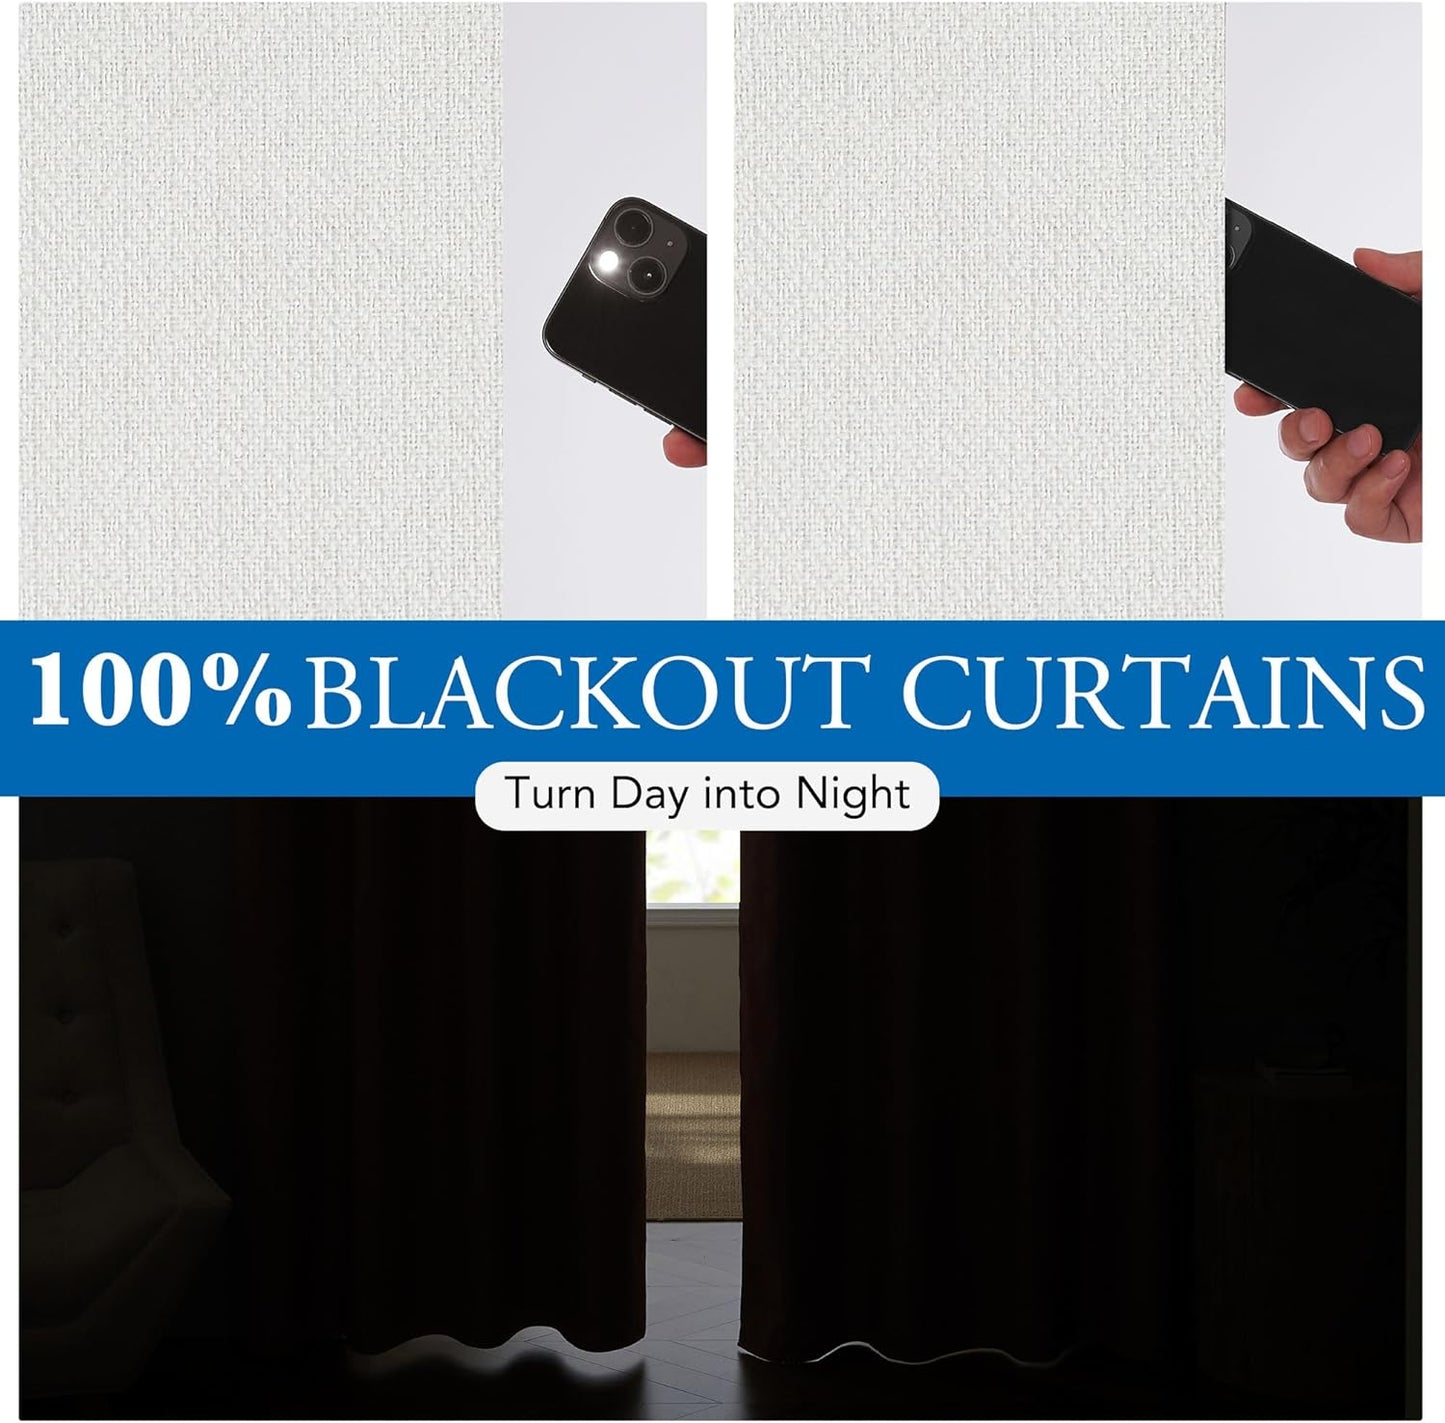 Beauoop 100% Blackout Curtain Panels Farmhouse Linen Textured Room Darkening Light Blocking Thermal Insulated Drapes for Bedroom/Living Room Back Tab Rod Pocket Window Treatment,40X63,White  Beauoop   